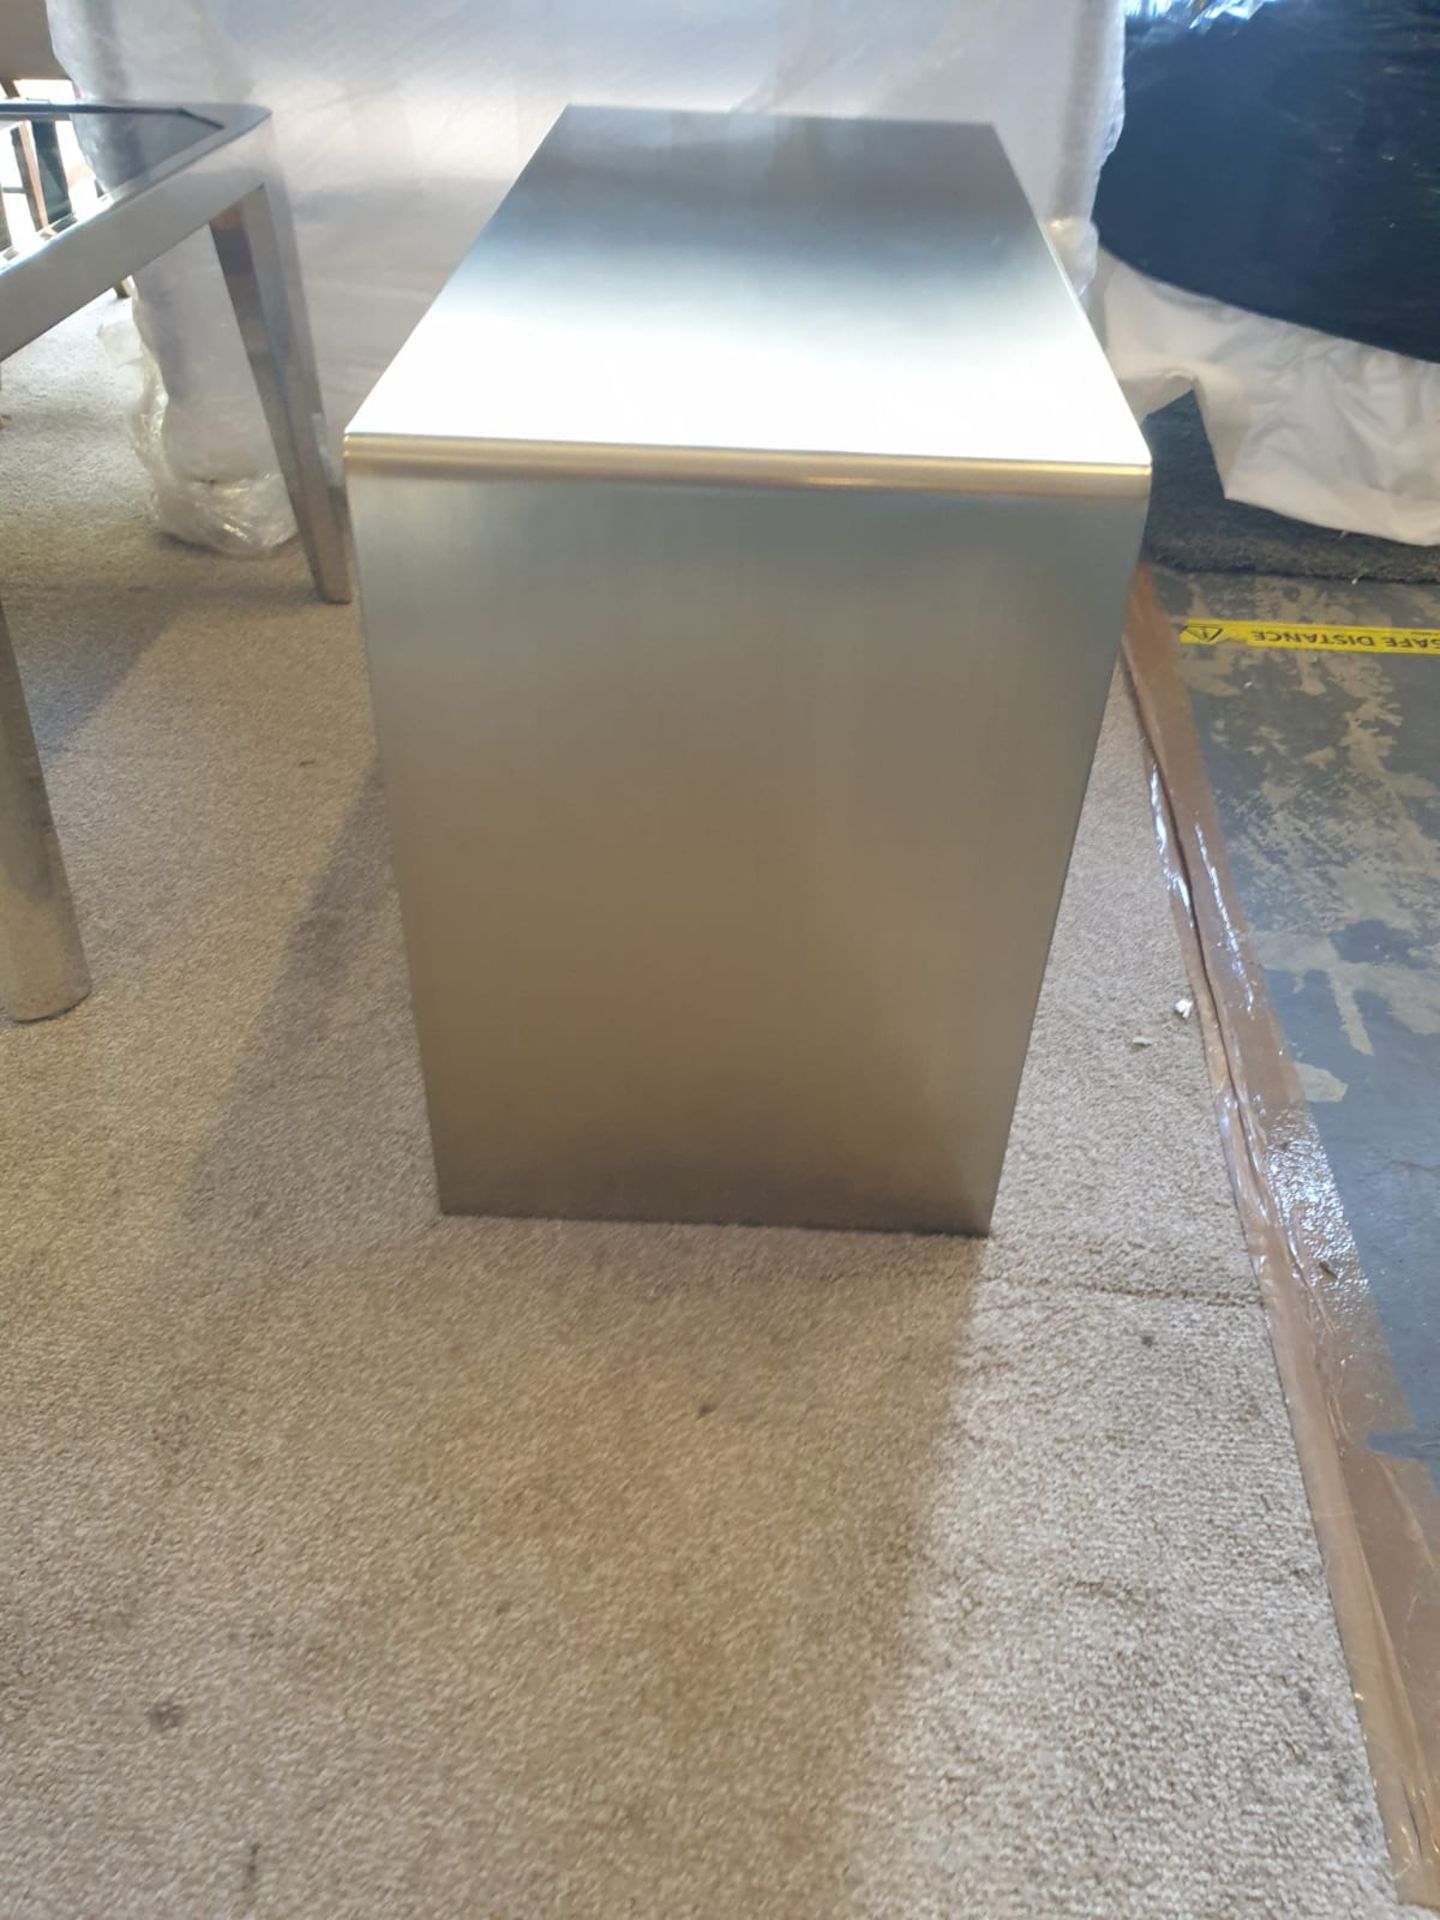 A brushed steel waterfall single piece side table constructed of solid stainless steel in brushed - Image 2 of 2